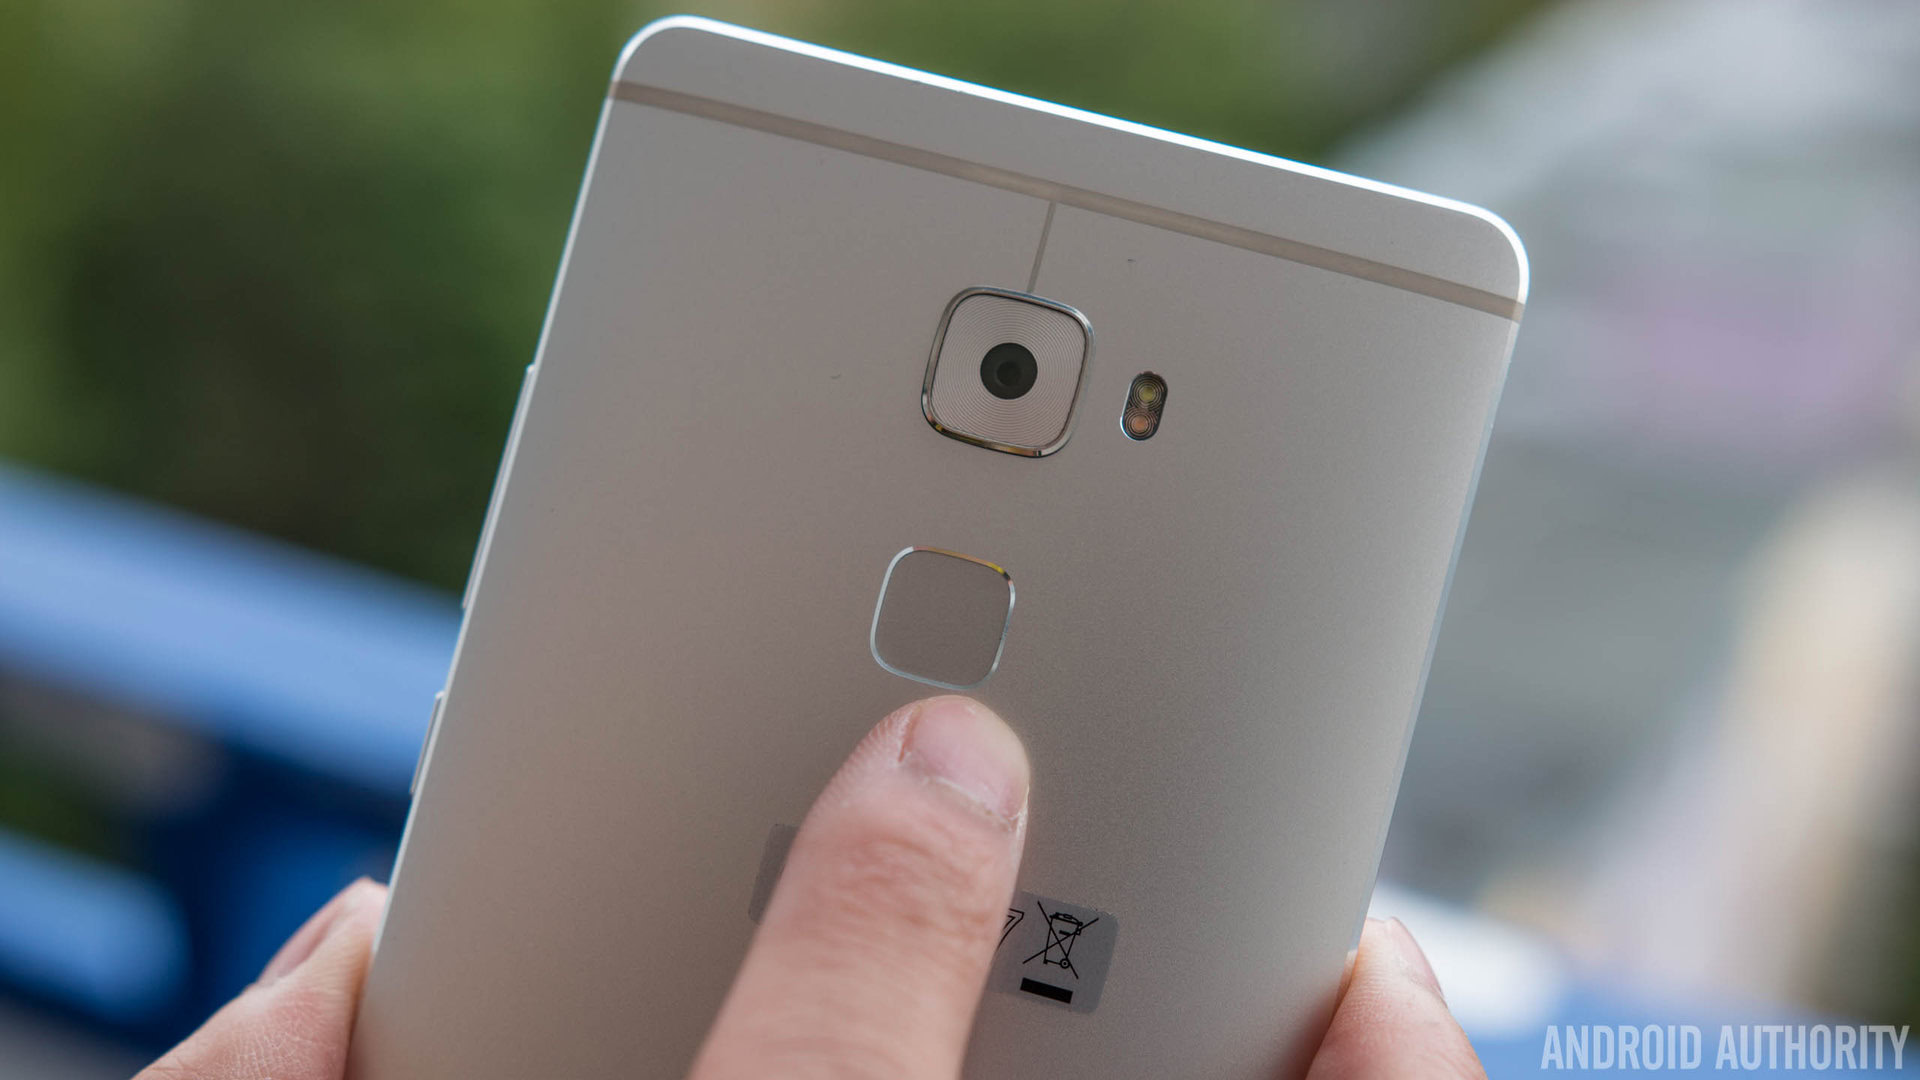 HUAWEI Mate S review - Authority